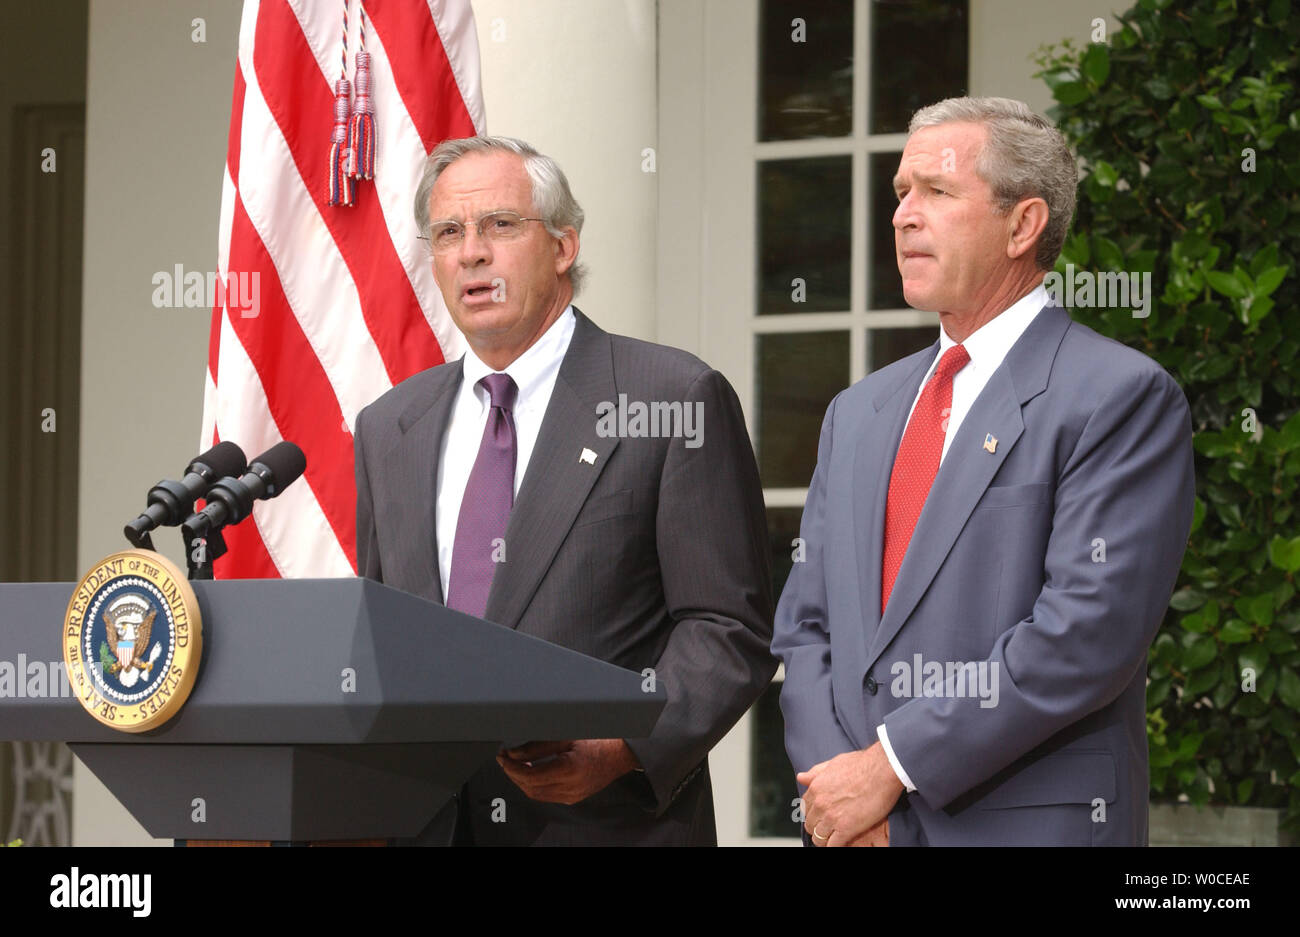 Rep. Porter Goss, R-FL, speaks to members of the press after President George W. Bush, left, announced that he will be his nominee as the new head of the CIA, on August 10, 2004 in Washington. Goss is a former member of the CIA and sits on the House of Representatives Intelligence Committee. (UPI Photo/Michael Kleinfeld) Stock Photo